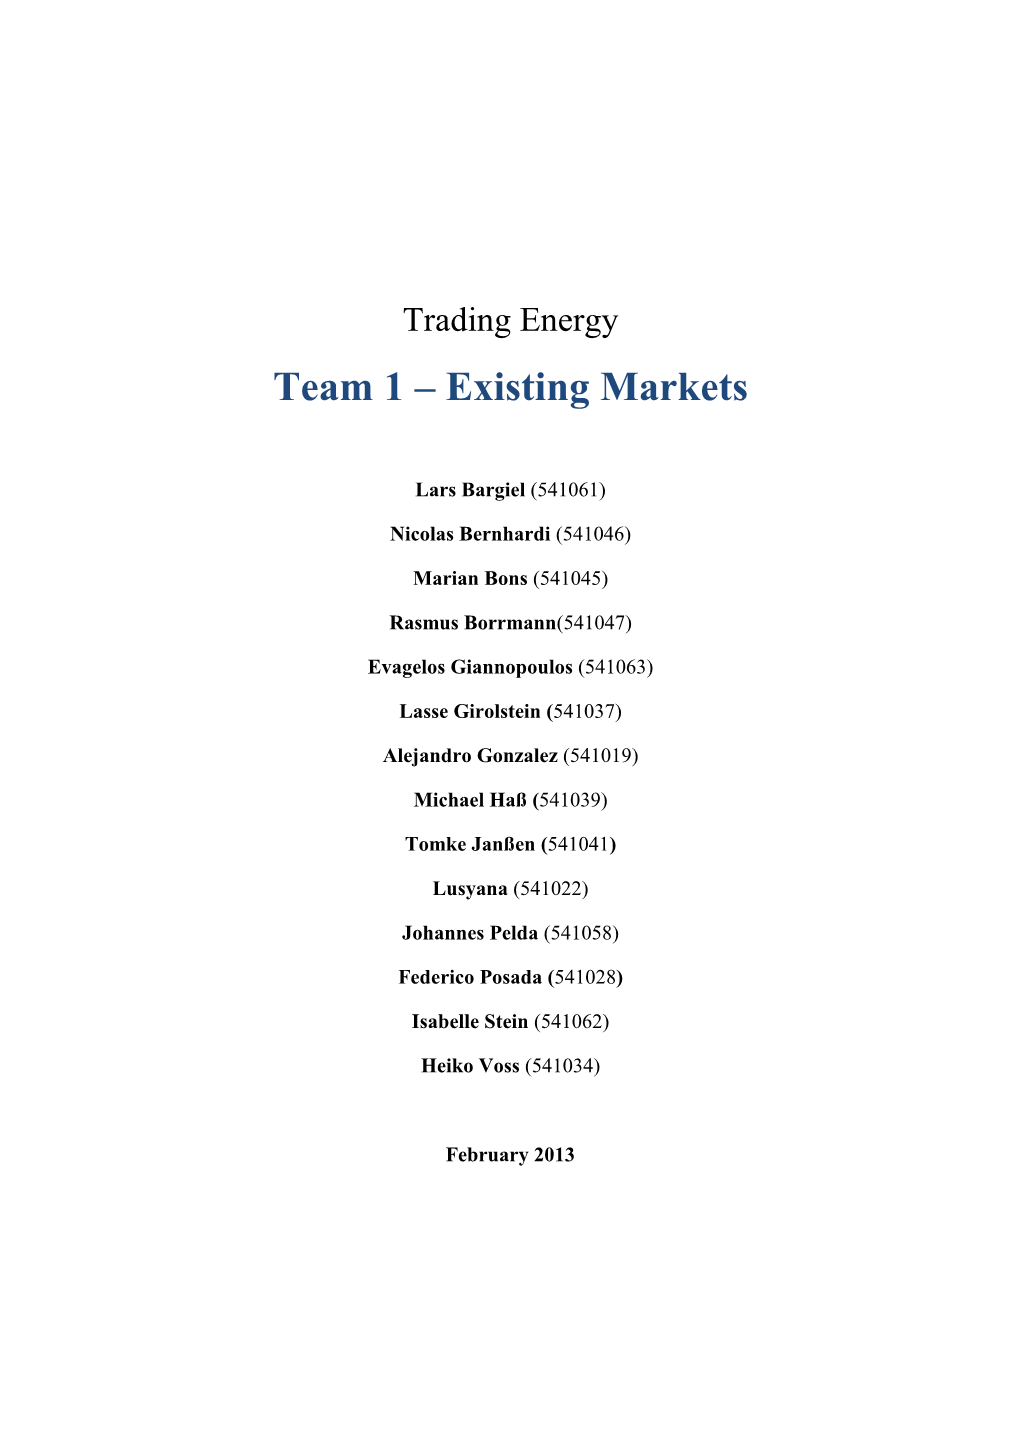 Trading Energy Team 1 – Existing Markets